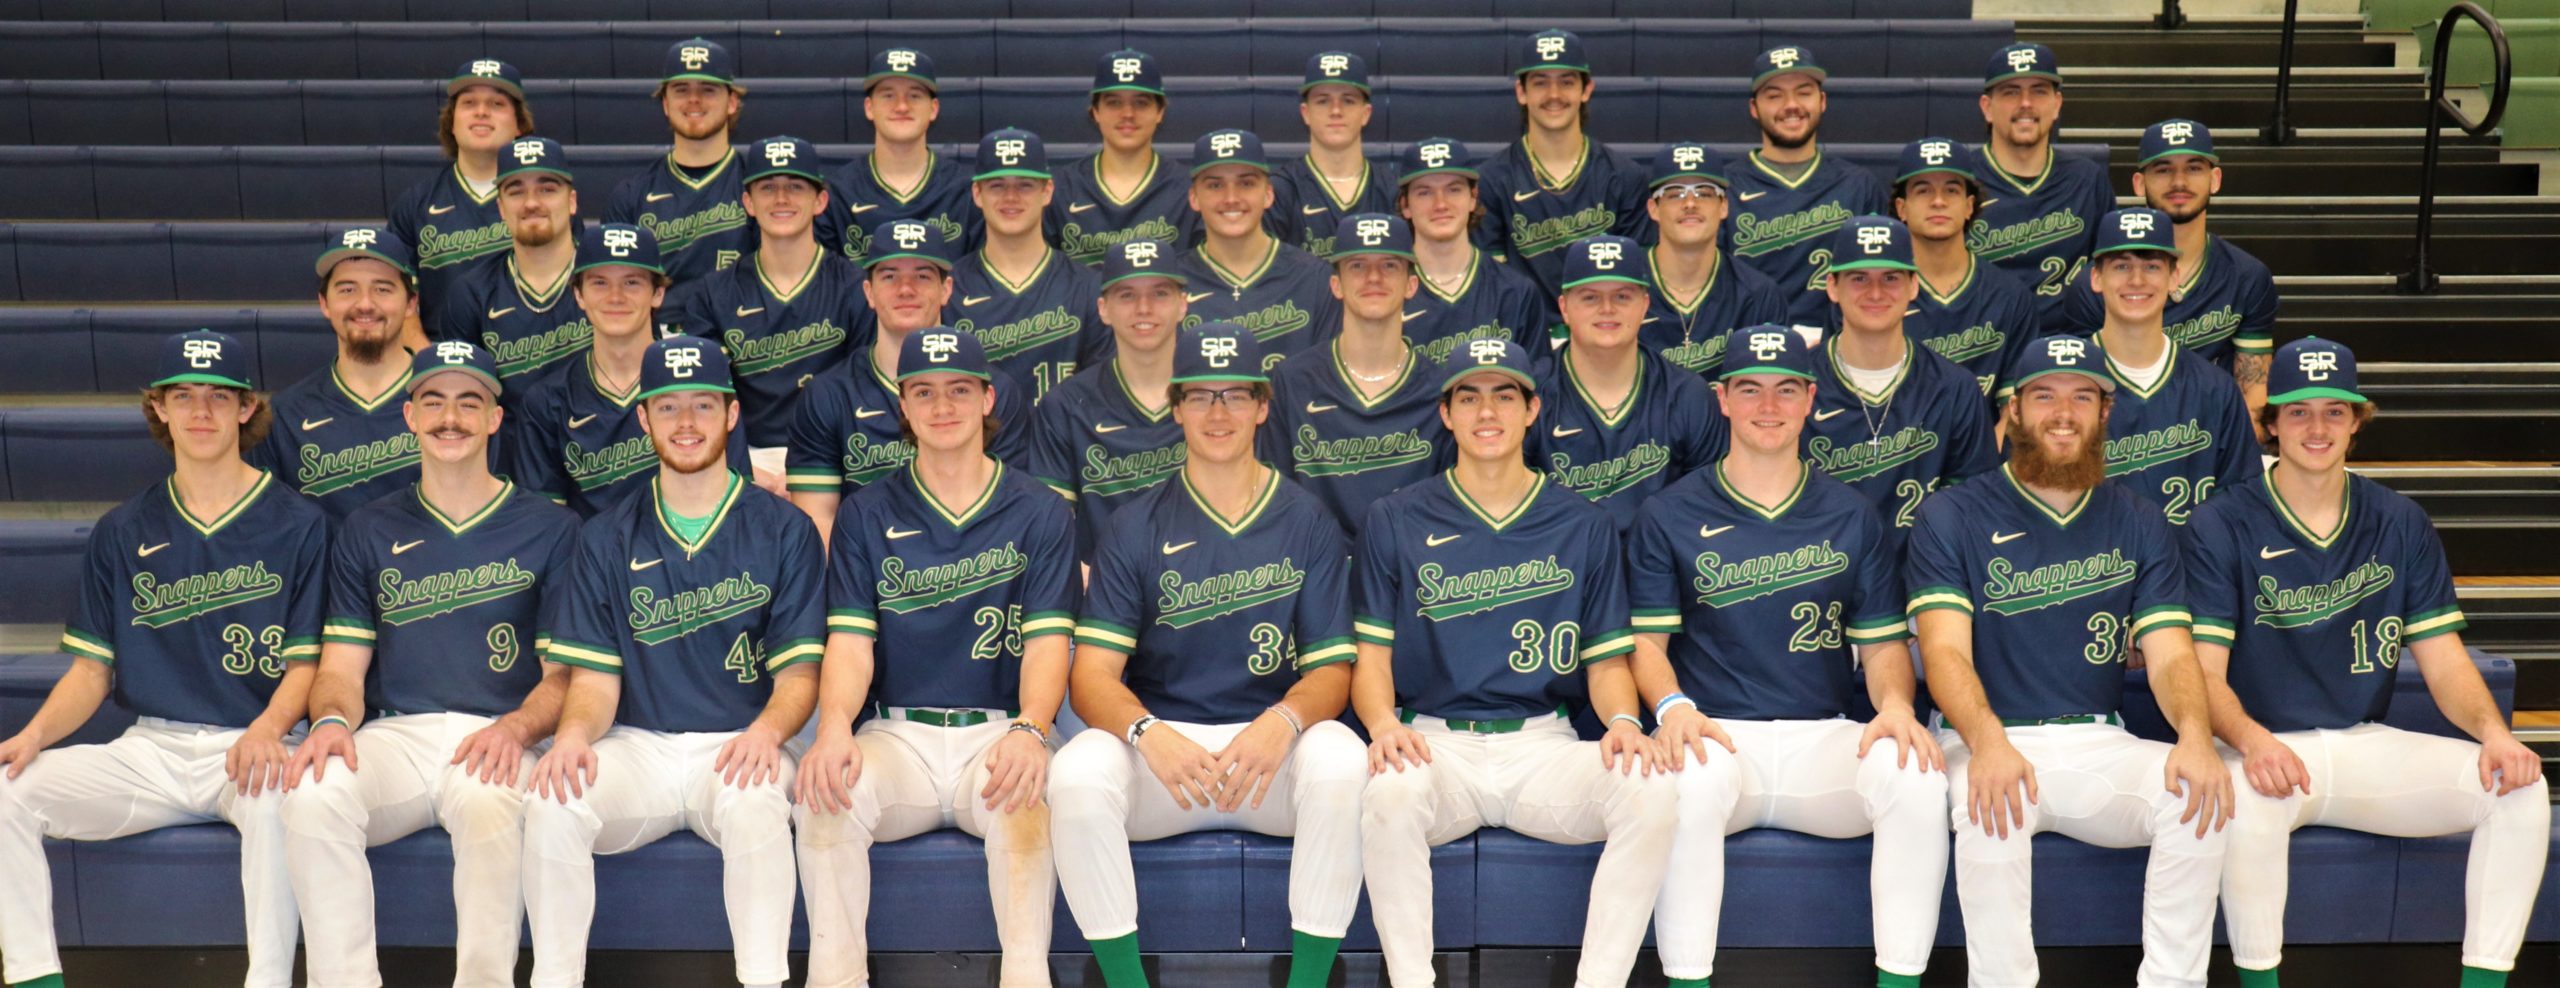 Baseball team picture